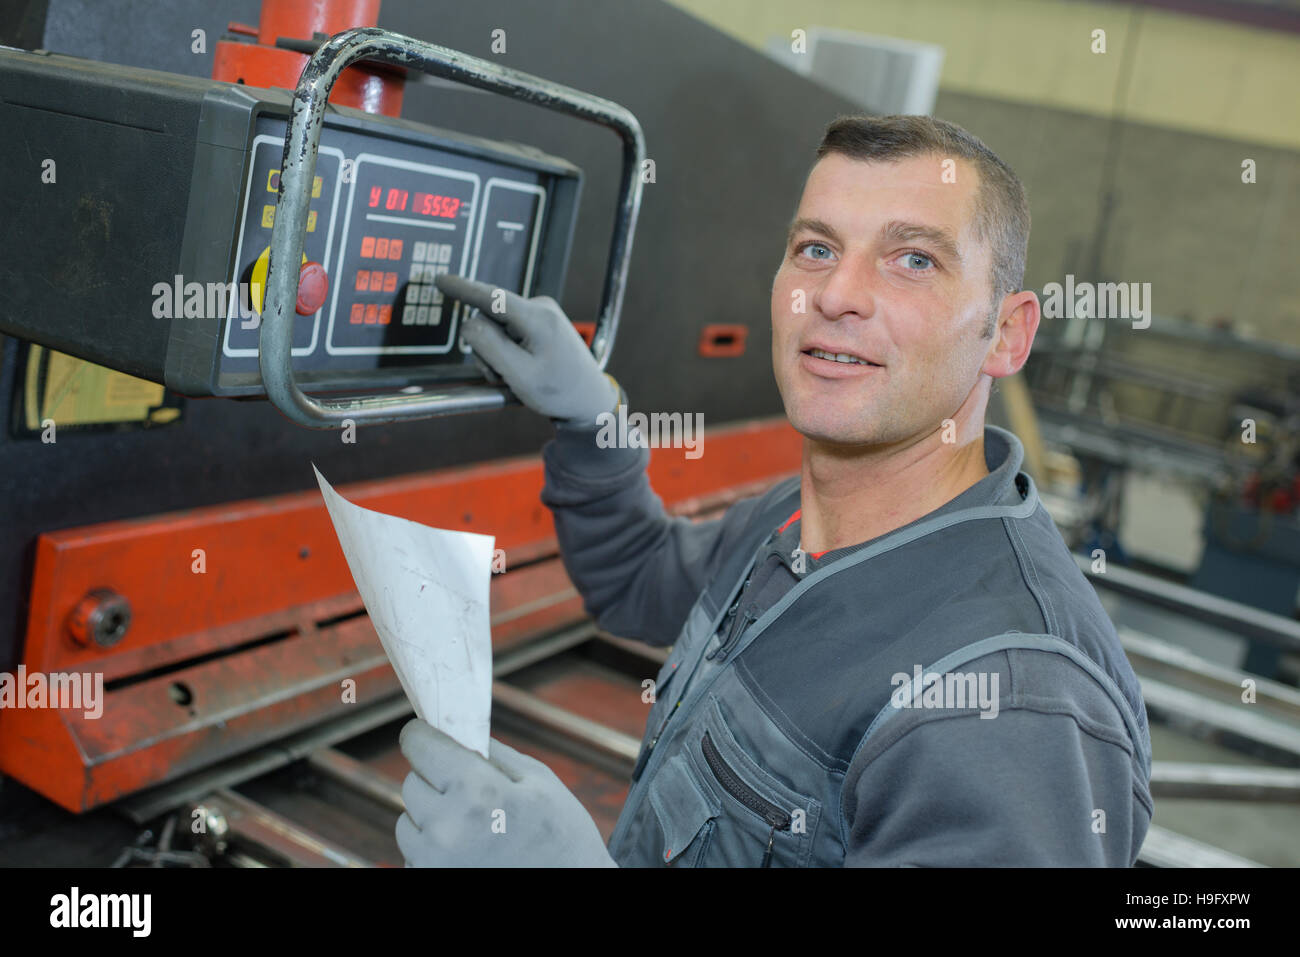 technicien using a electronic device in factory Stock Photo